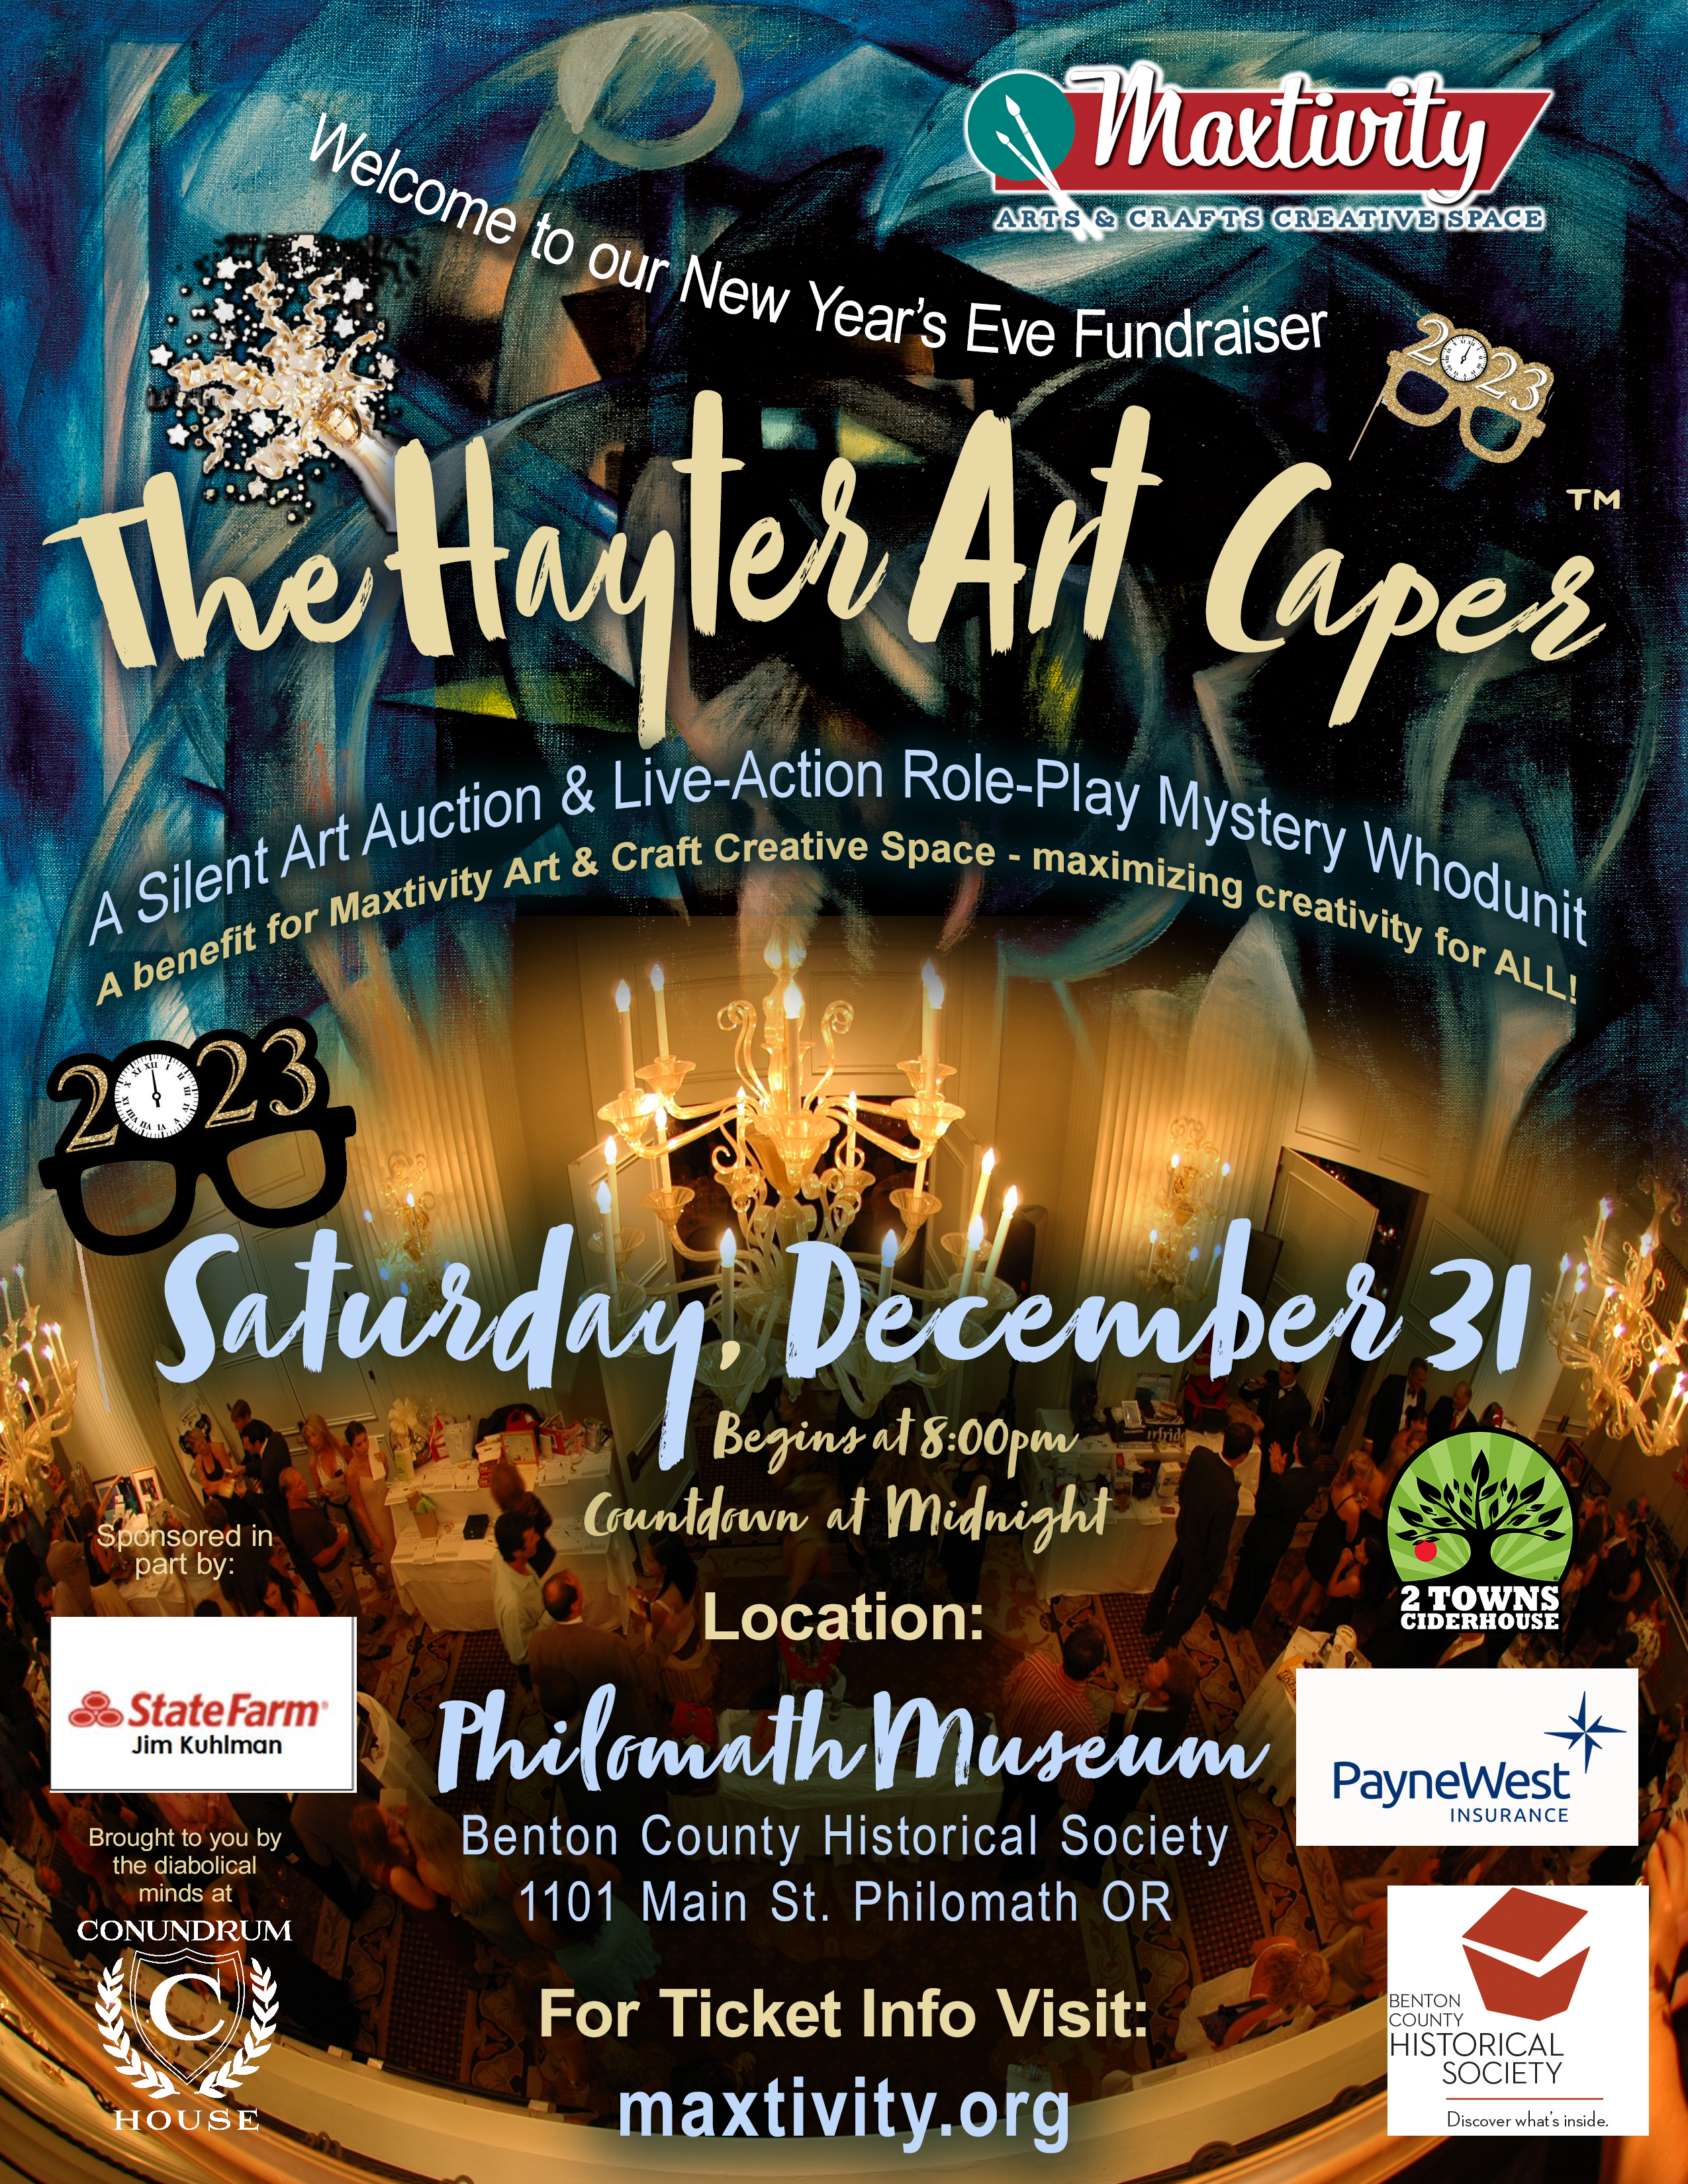 Hayter Art Caper 2022 -  Fundraiser for Maxtivity in Philomath Oregon. Benton County Historical Society - Philomath Museum, 1101 Main Street, Philomath Oregon 97330. Doors open at 7:30 p - event starts at 8 p - Midnight object drop to bring int he new year!